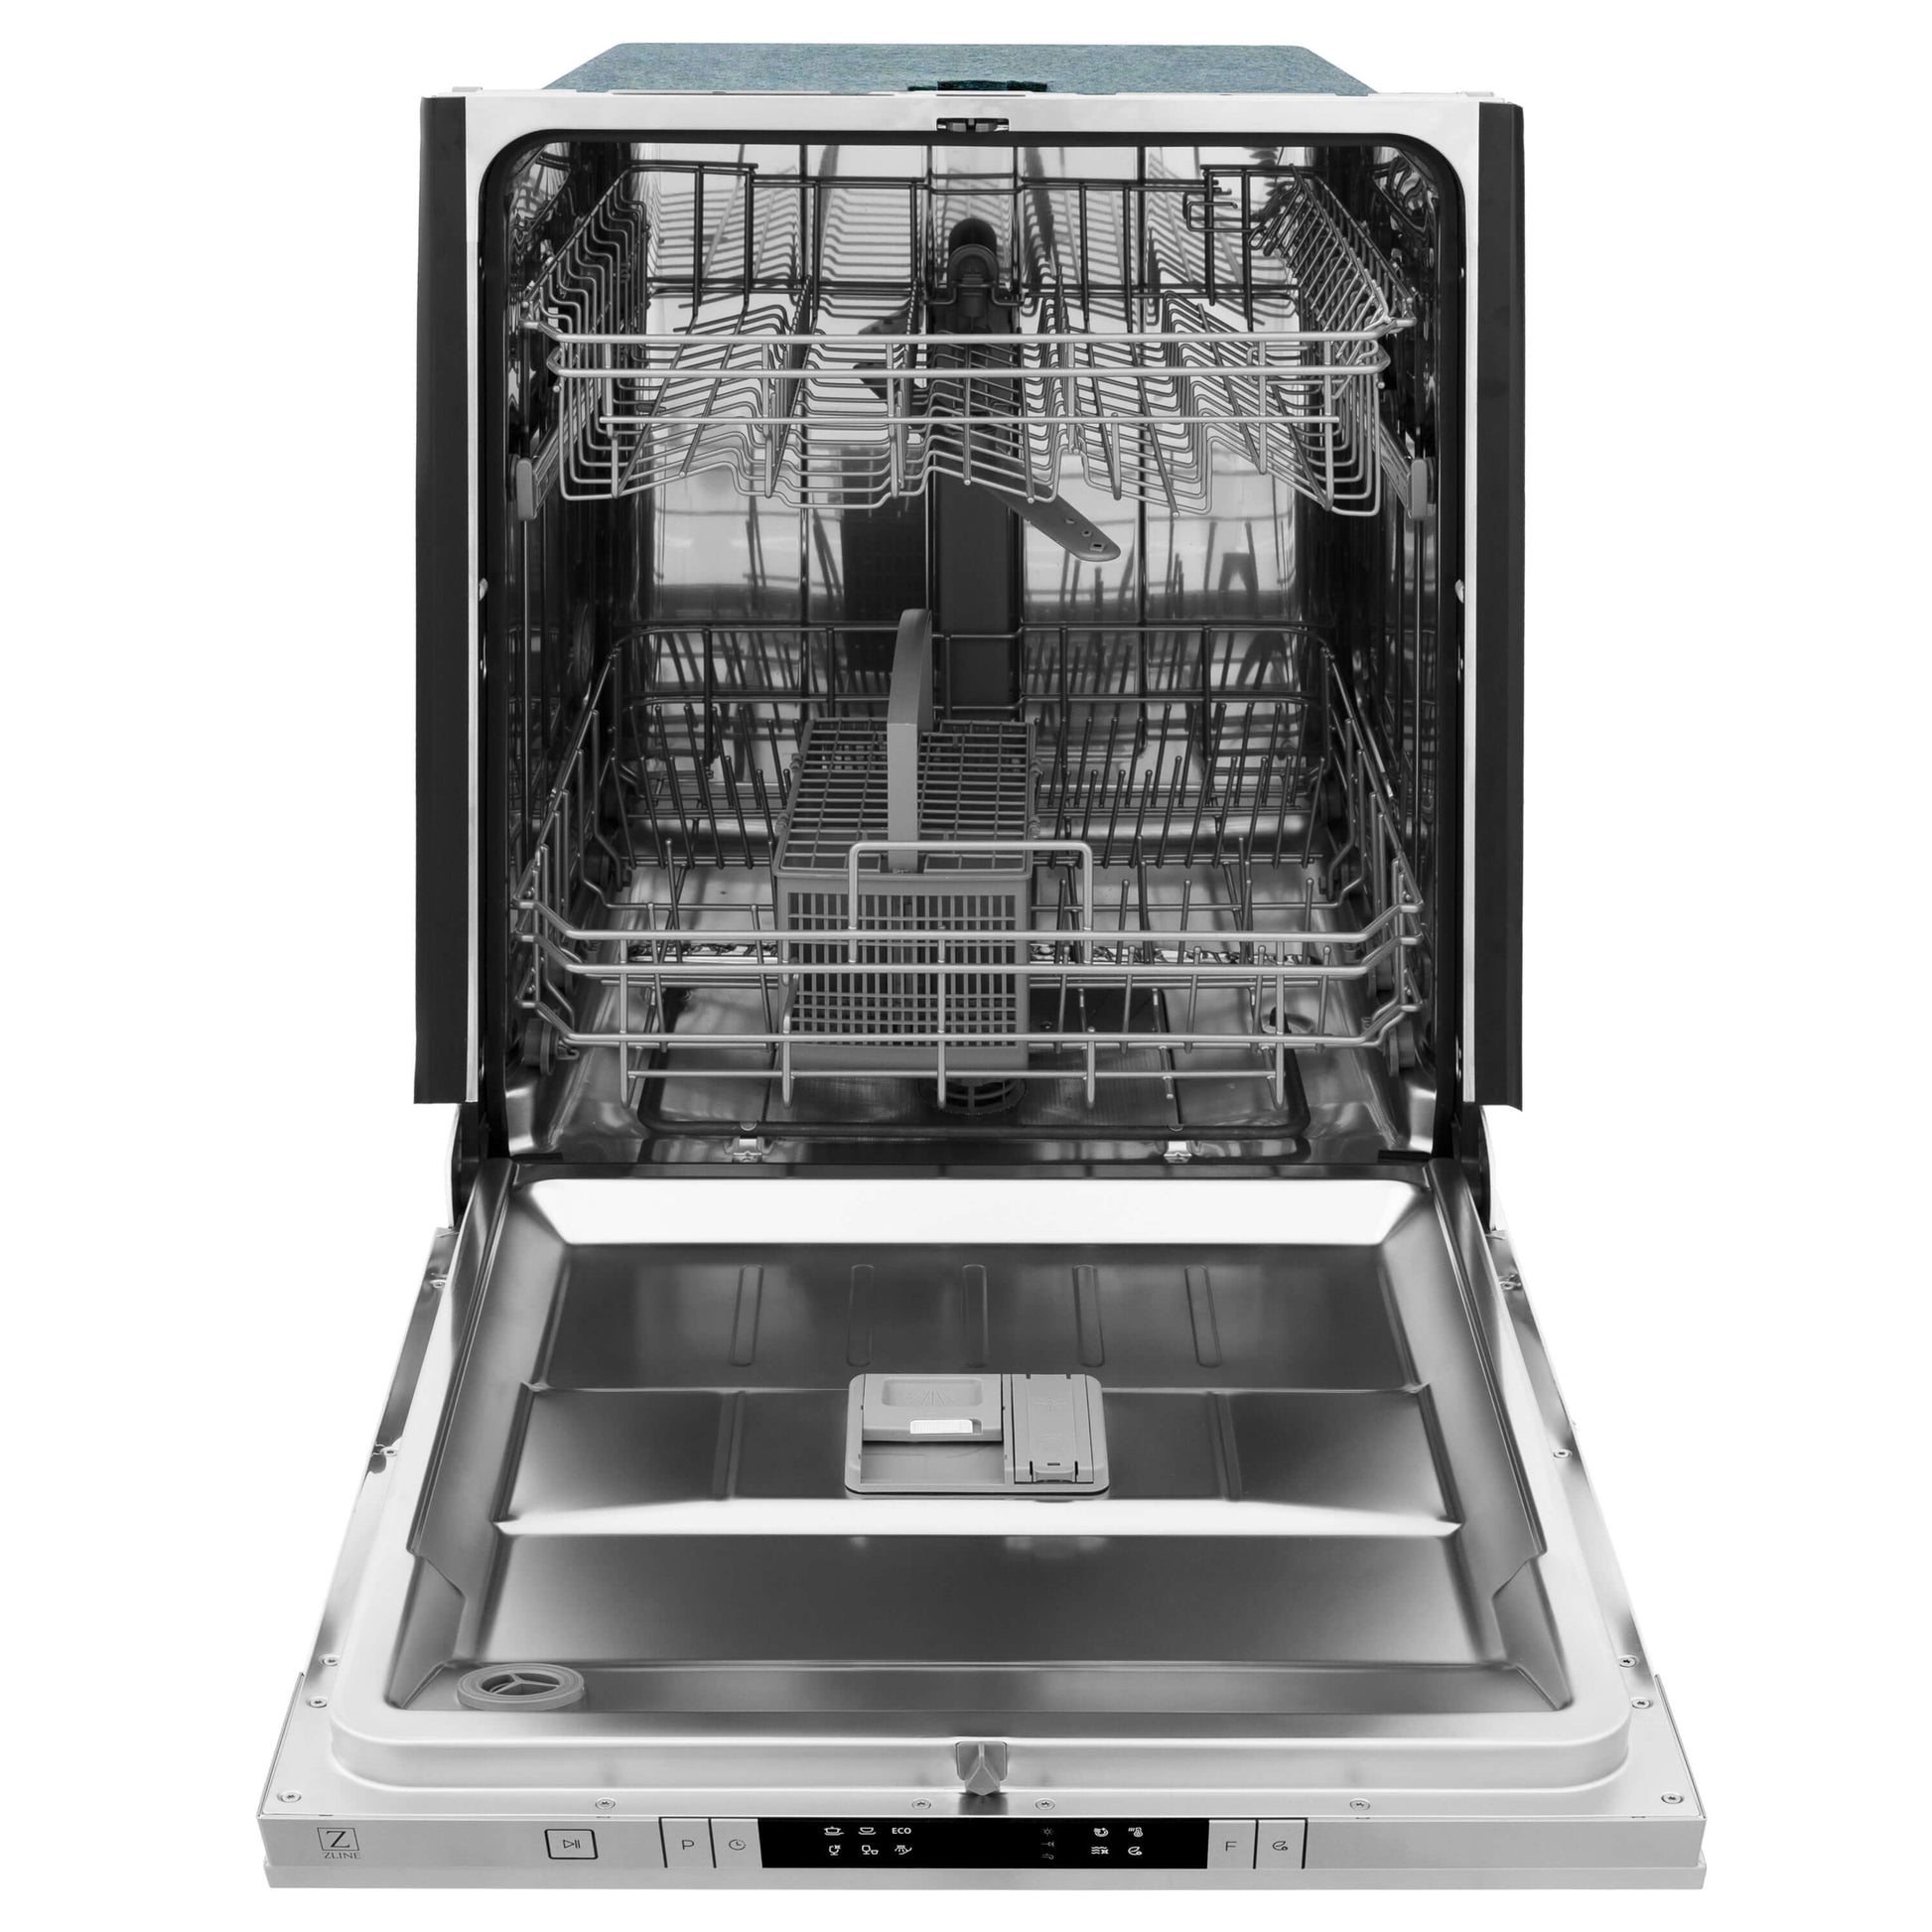 ZLINE 3-Appliance 36" Kitchen Package with Stainless Steel Dual Fuel Range, Convertible Vent Range Hood, and Dishwasher